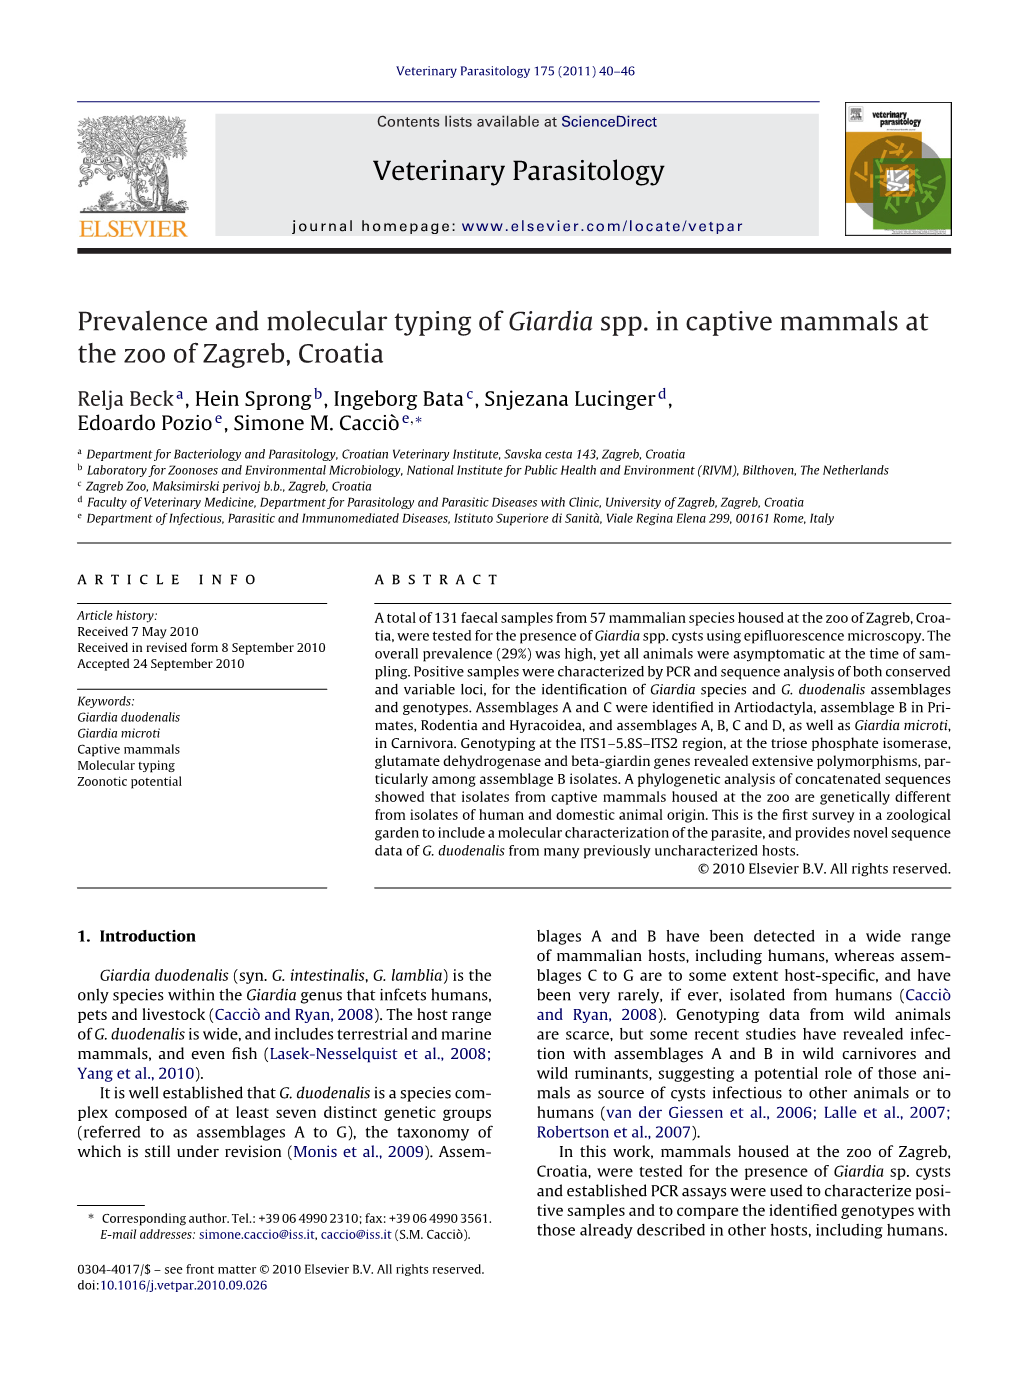 Prevalence and Molecular Typing of Giardia Spp. in Captive Mammals at the Zoo of Zagreb, Croatia